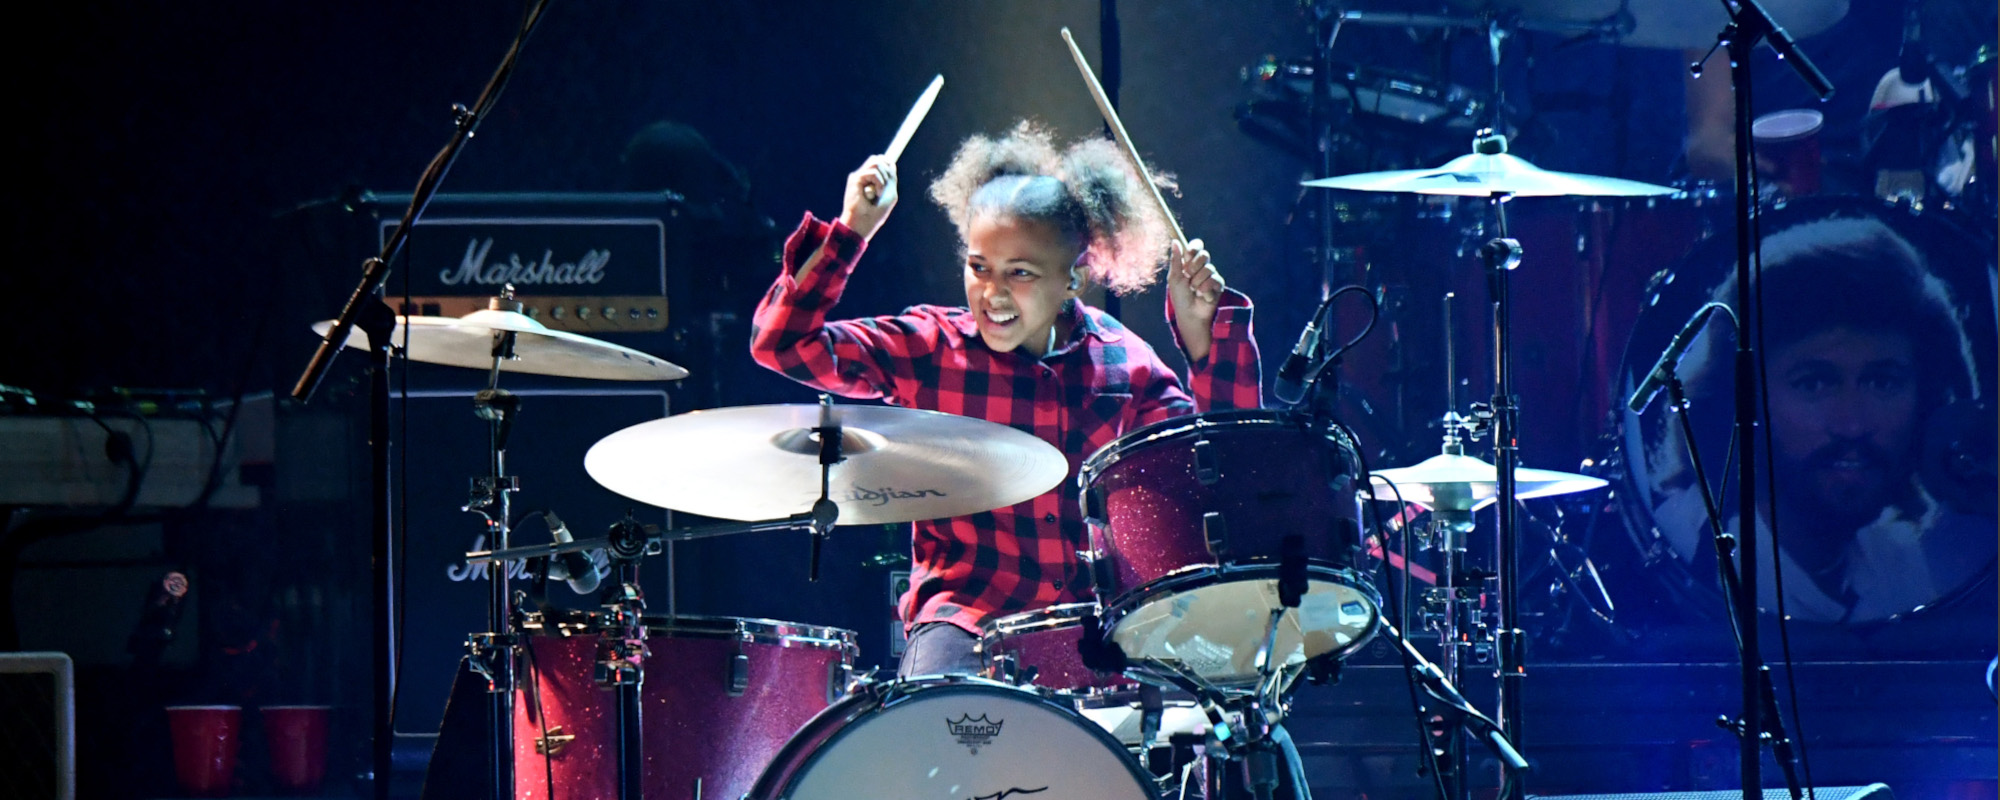 11-Year-Old Drum Prodigy Nandi Bushell Covers Billie Eilish’s “Happier Than Ever”